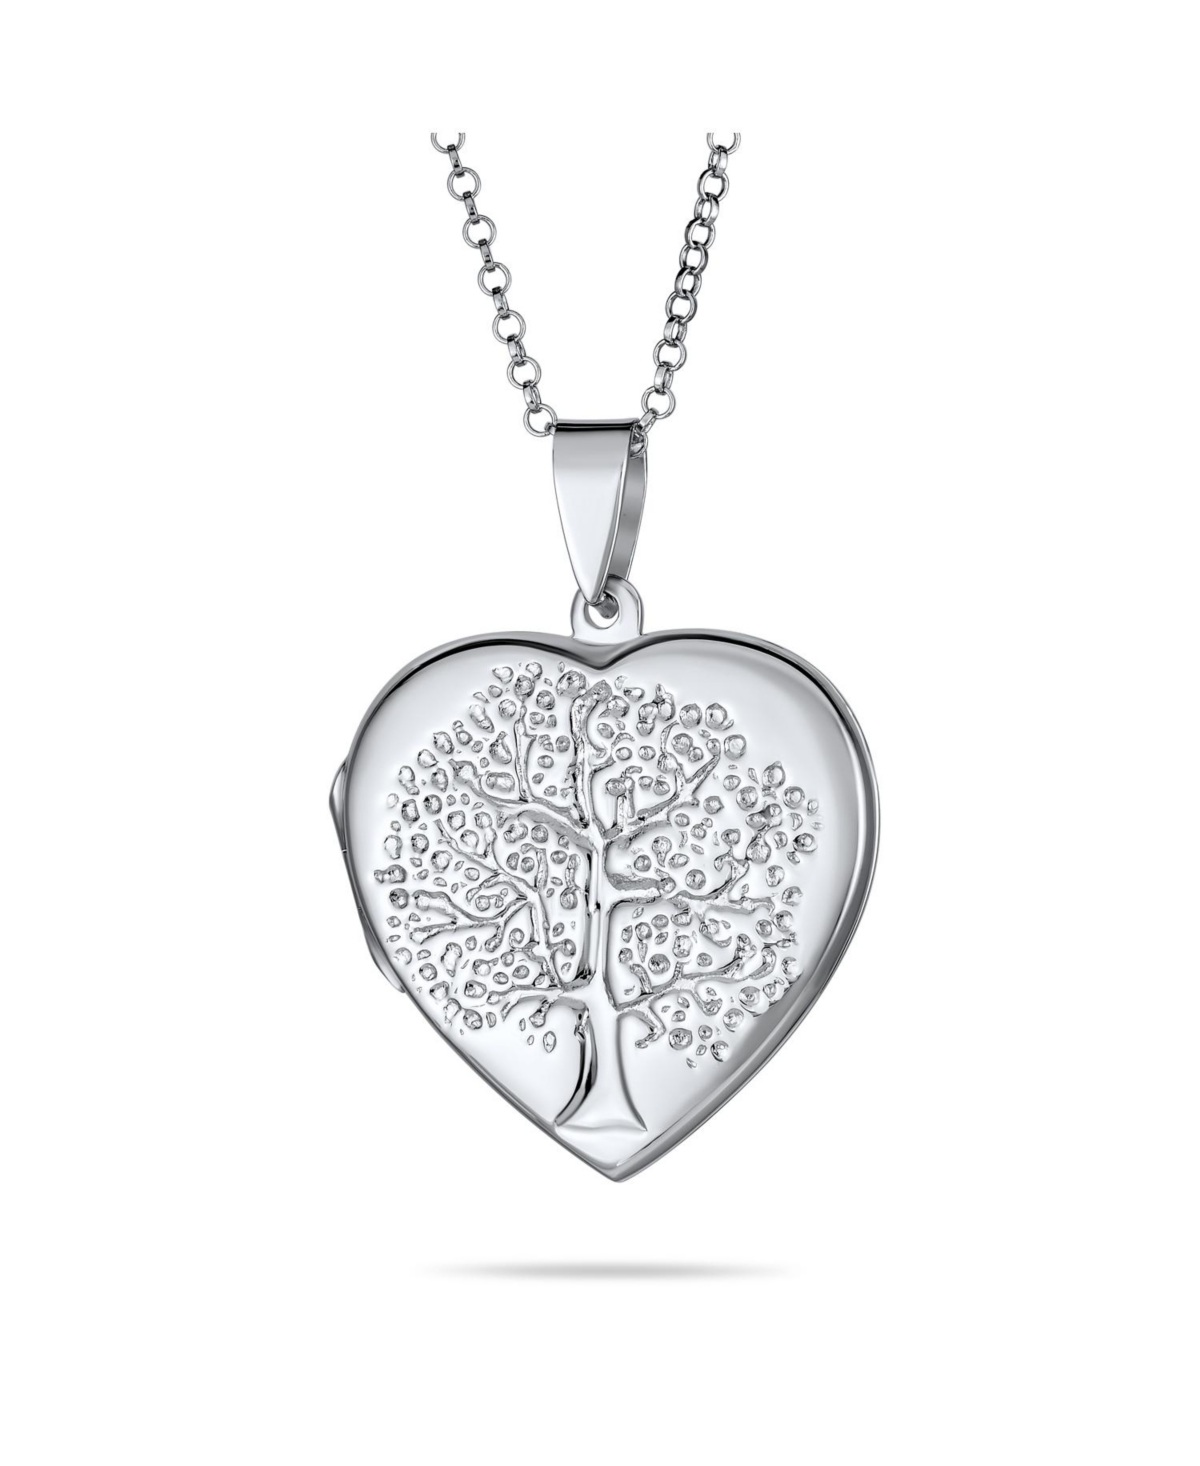 Traditional Family Tree Of Life Heart Locket Keepsake Photo Locket Necklace Pendant For Women Holds Pictures .925 Sterling Silver Custom